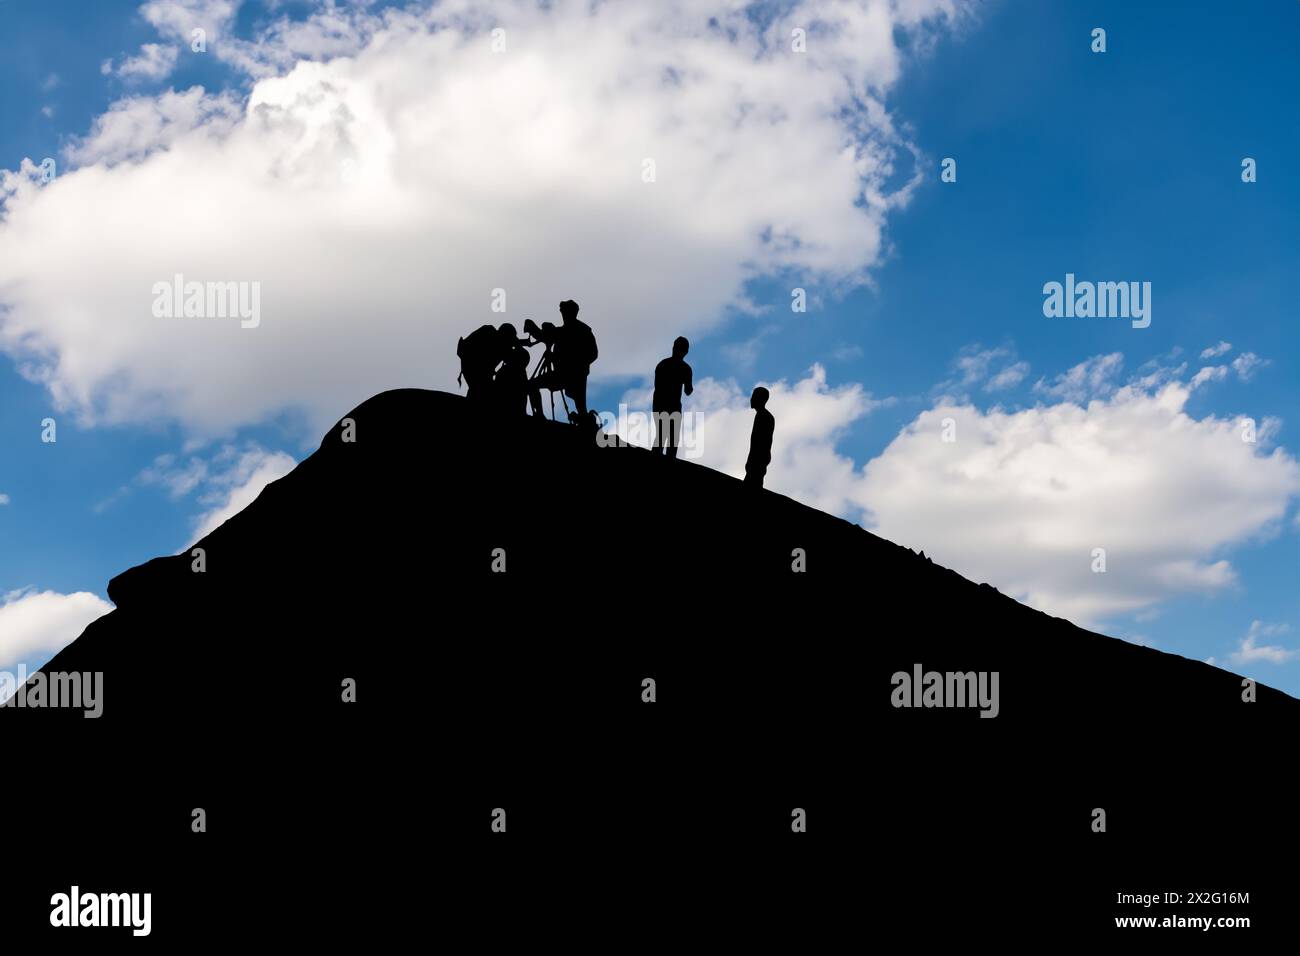 Silhouetted team conducting volcano research during picturesque sunset backdrop Stock Photo